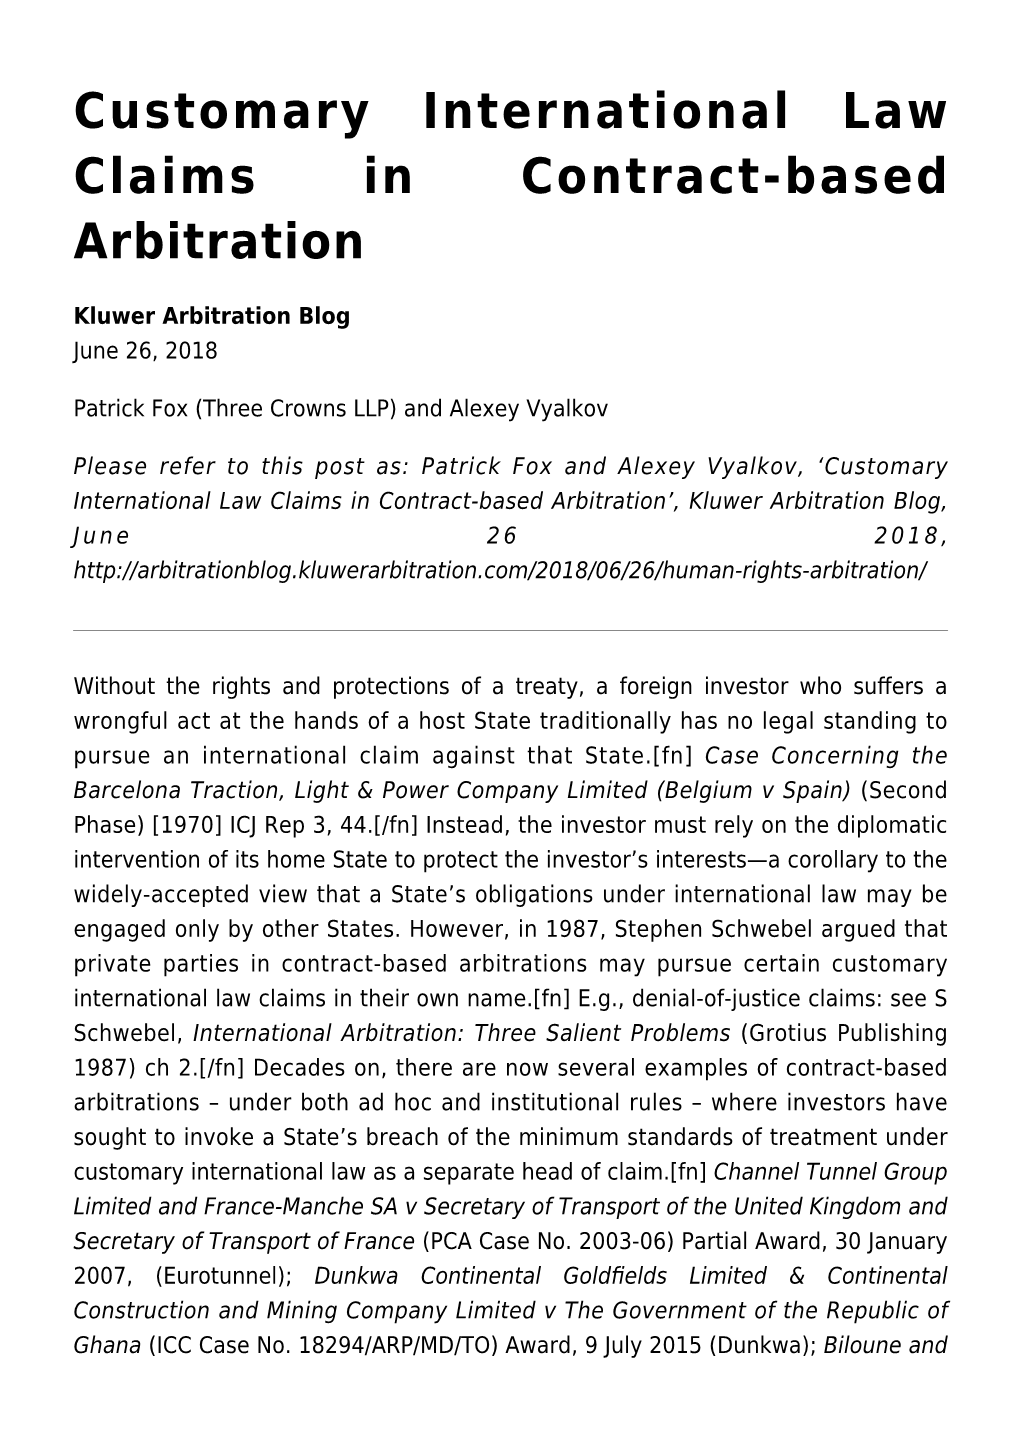 Customary International Law Claims in Contract-Based Arbitration